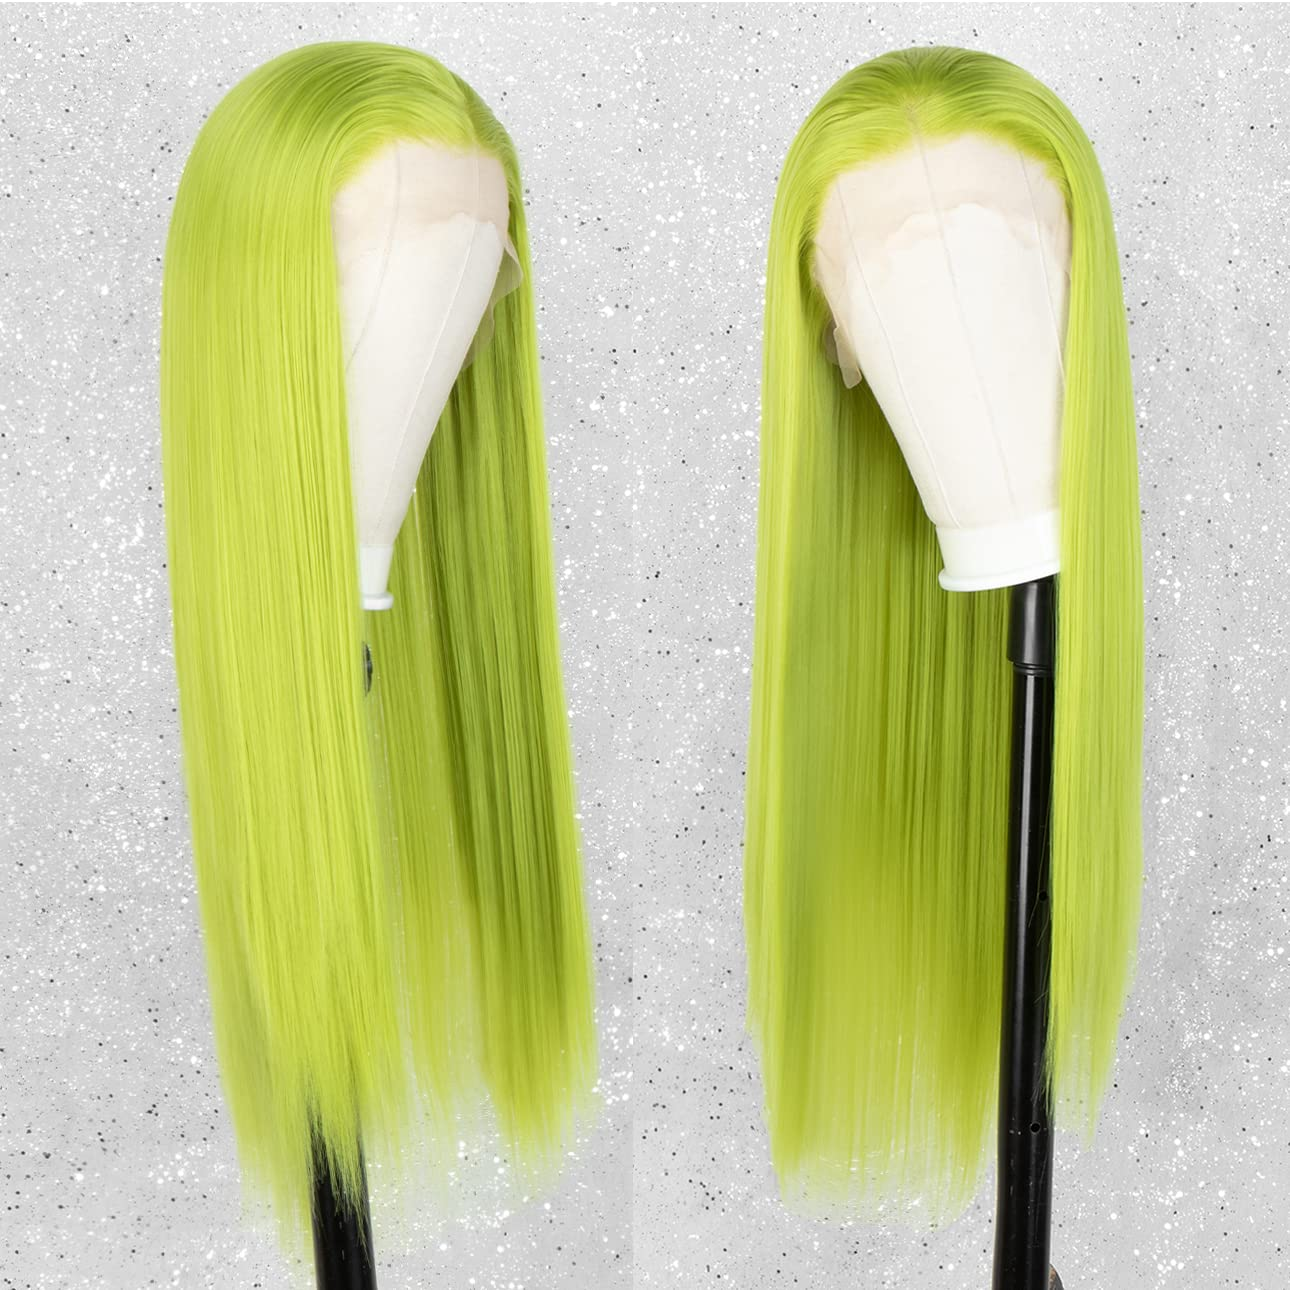  Long Straight Neon Green Lace Front Wig for Women DragQueen